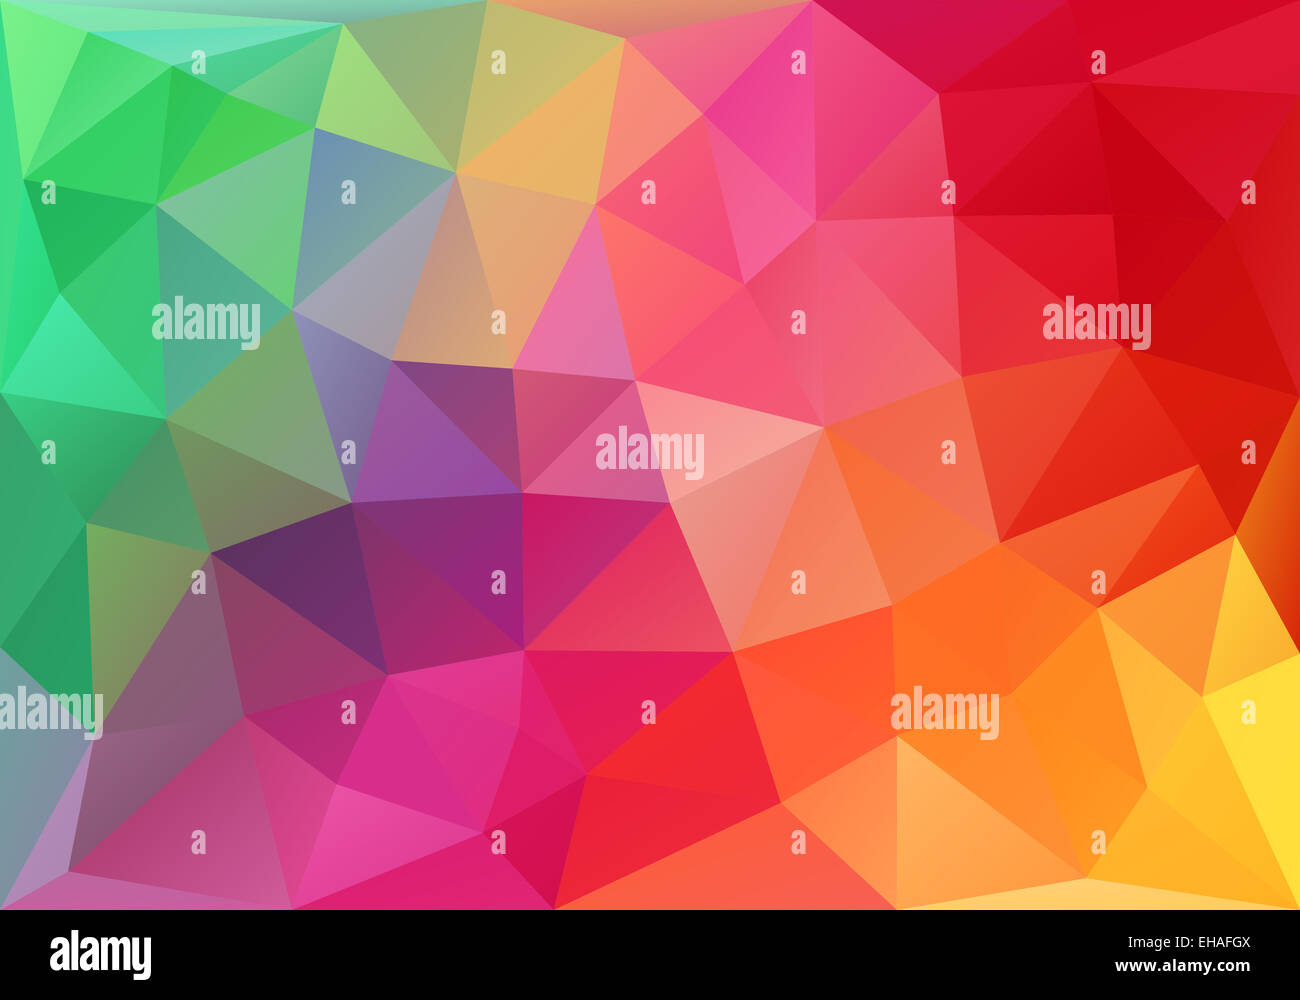 abstract colorful low poly background, vector design element Stock Photo